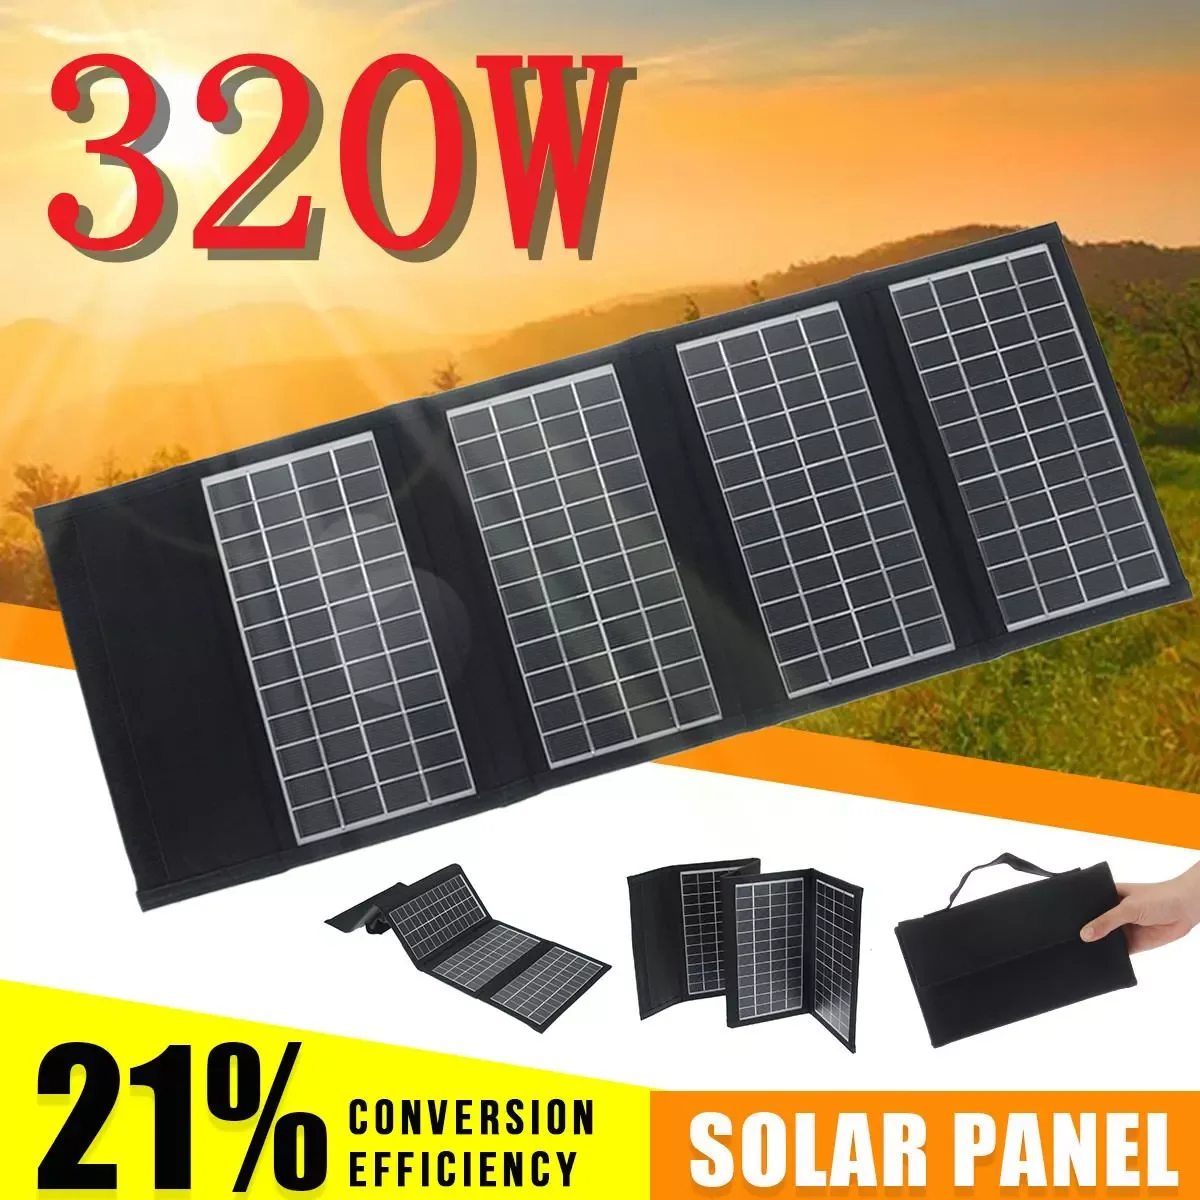 

NEW Sunpower Solar Panels Portable Foldable Solar Panel Waterproof Outdoor Crystalline Solar Cells Charger 670x245 mm